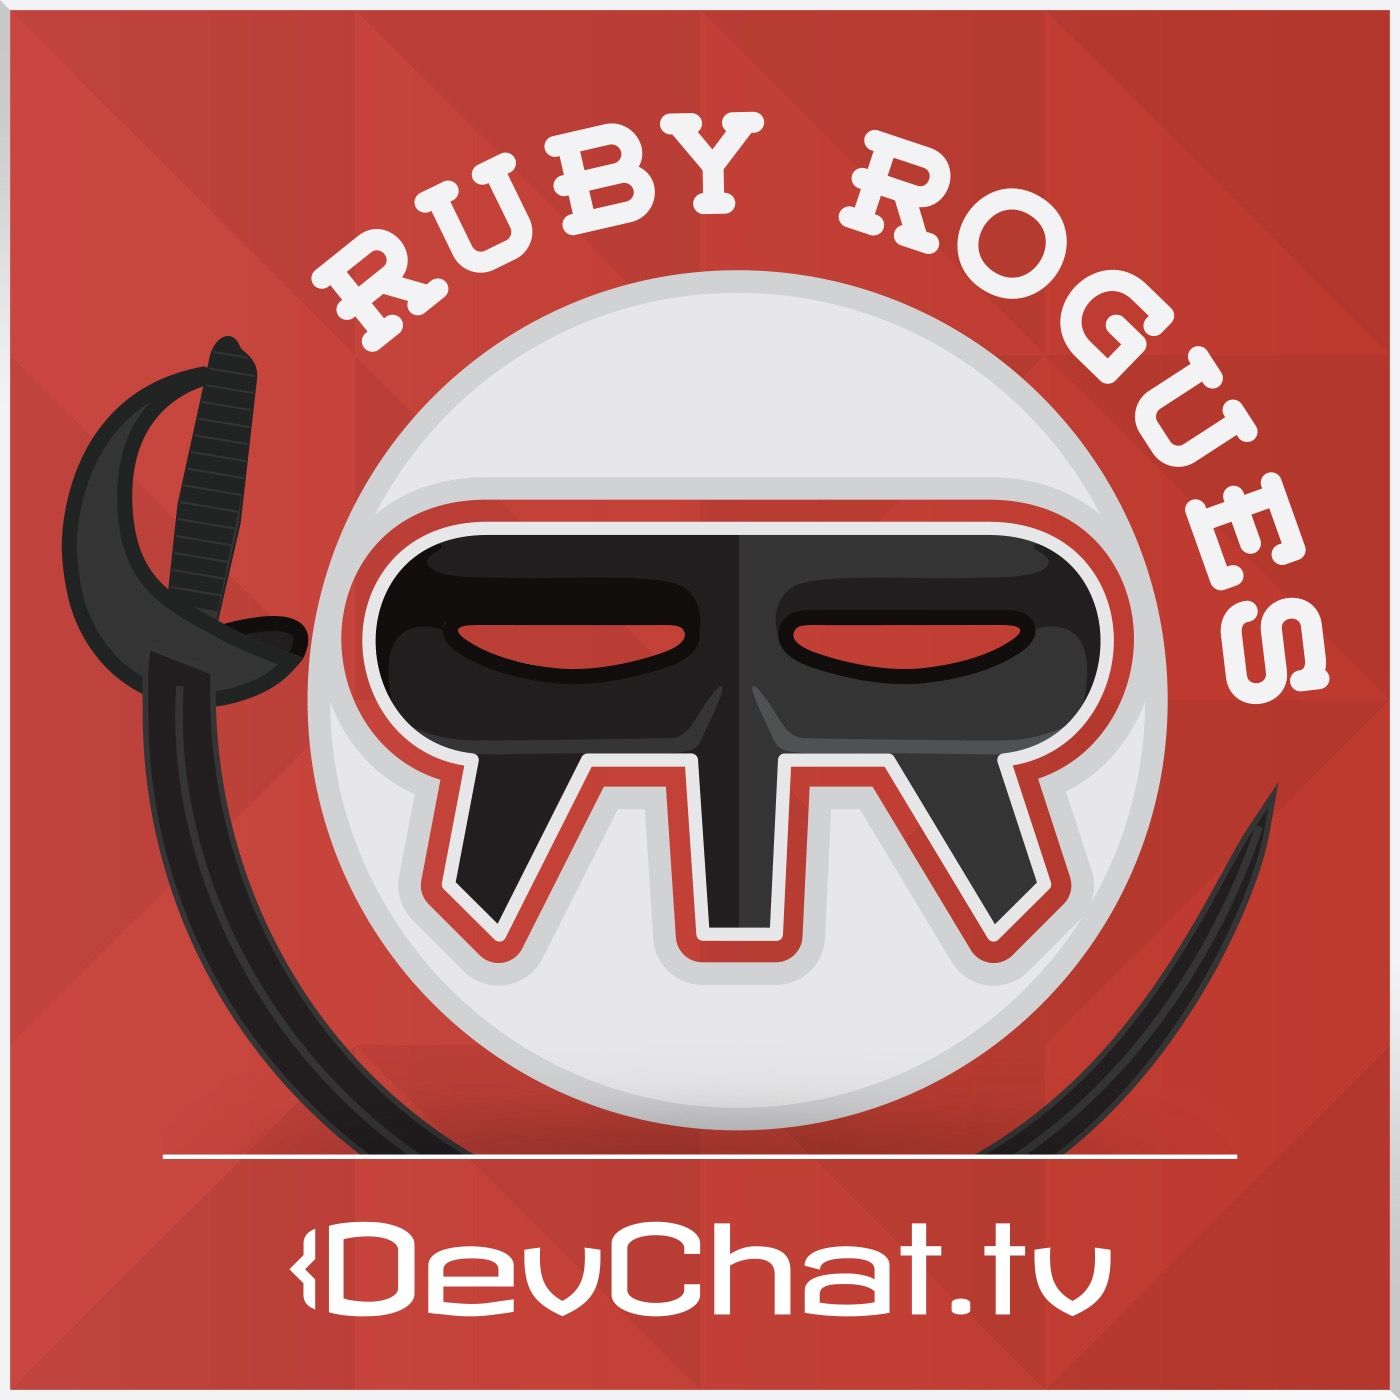 Avo: Building Custom Interfaces, Managing Users, and Creating Authorization Systems - RUBY 634